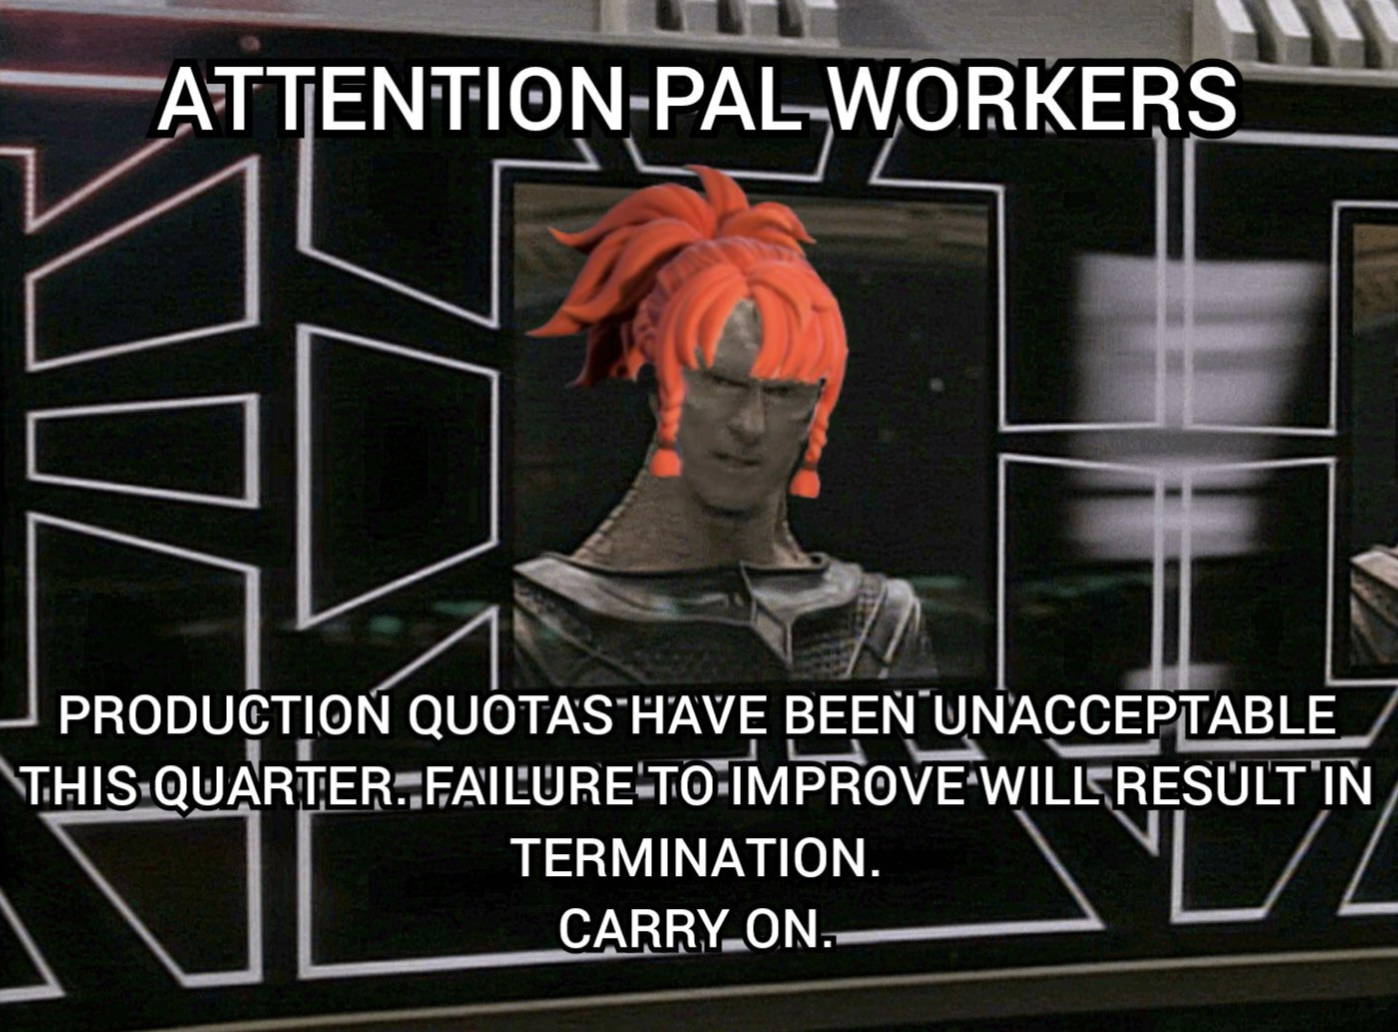 poster - AttentionPalWorkers Production Quotas Have Been Unacceptable This Quarter. Failure To Improve Will Result In Termination. Carry On.